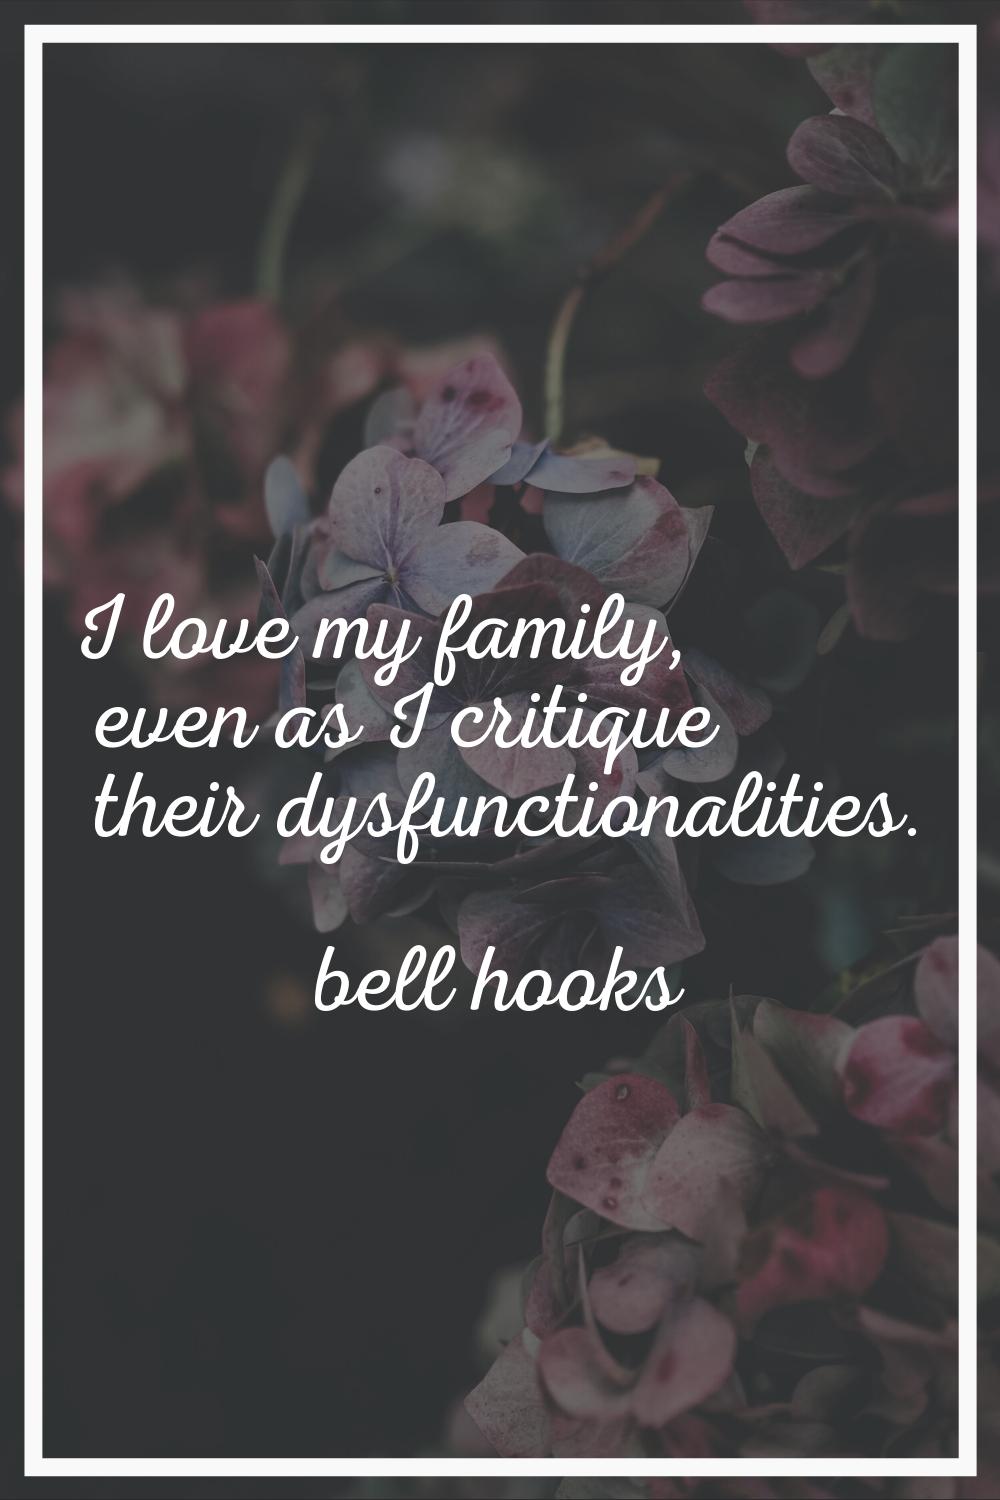 I love my family, even as I critique their dysfunctionalities.